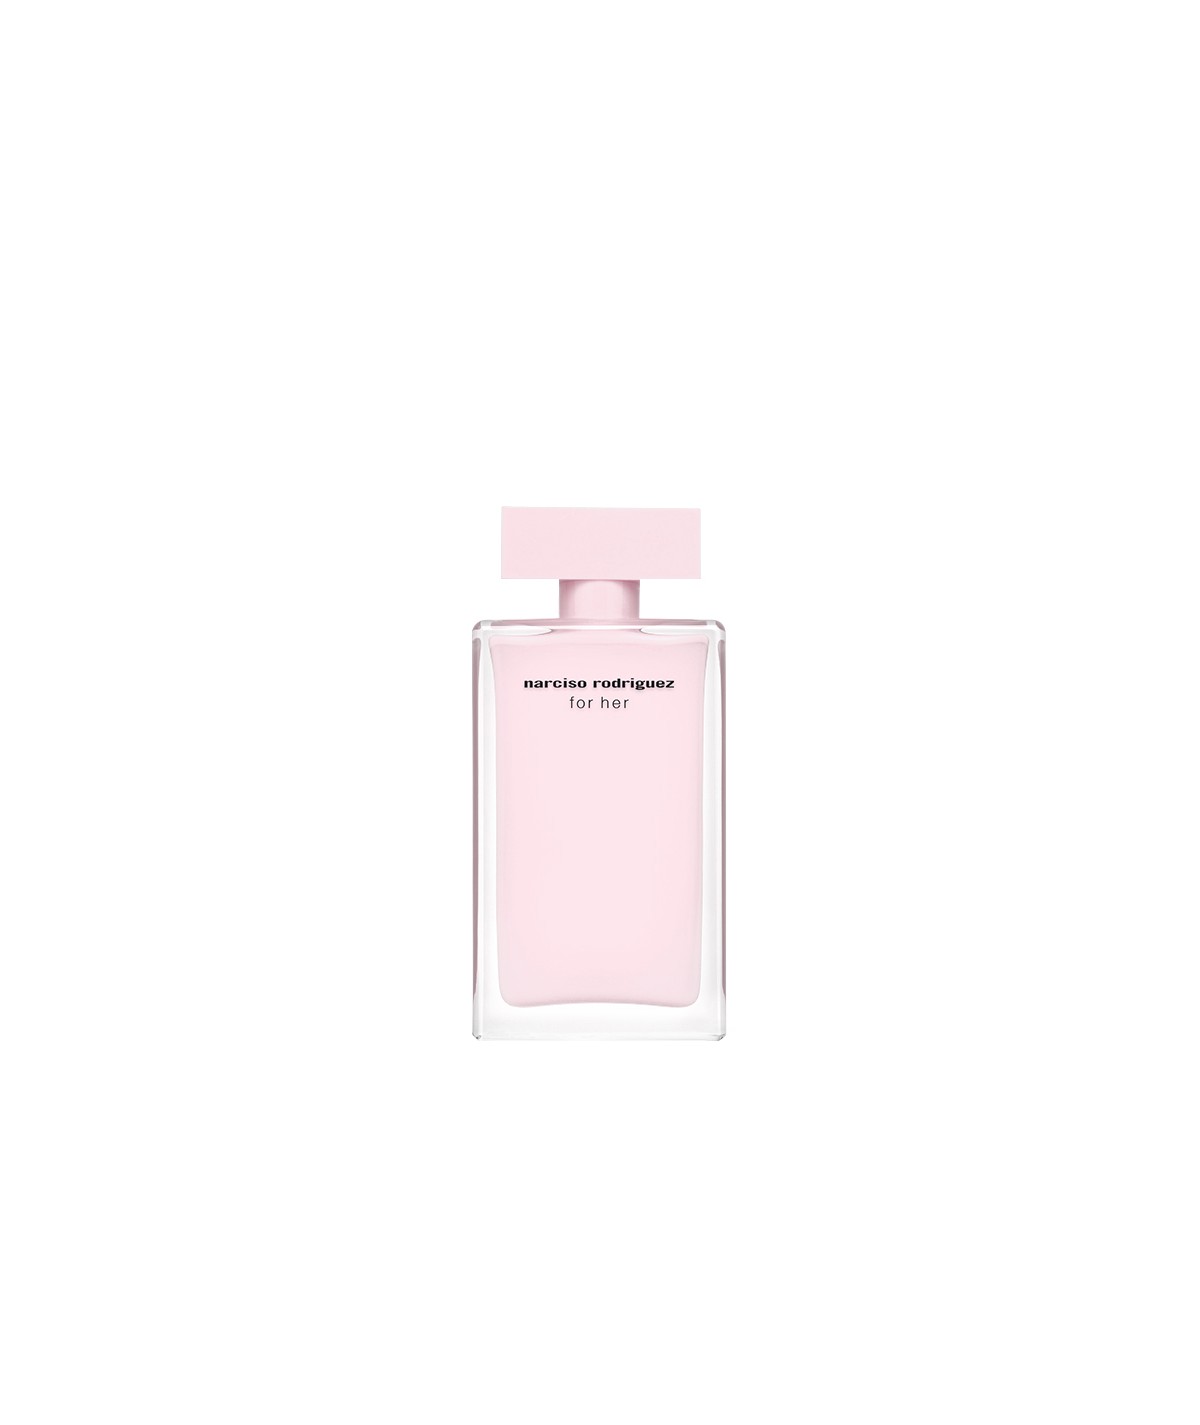 NARCISO RODRIGUEZ - "FOR HER" EDP